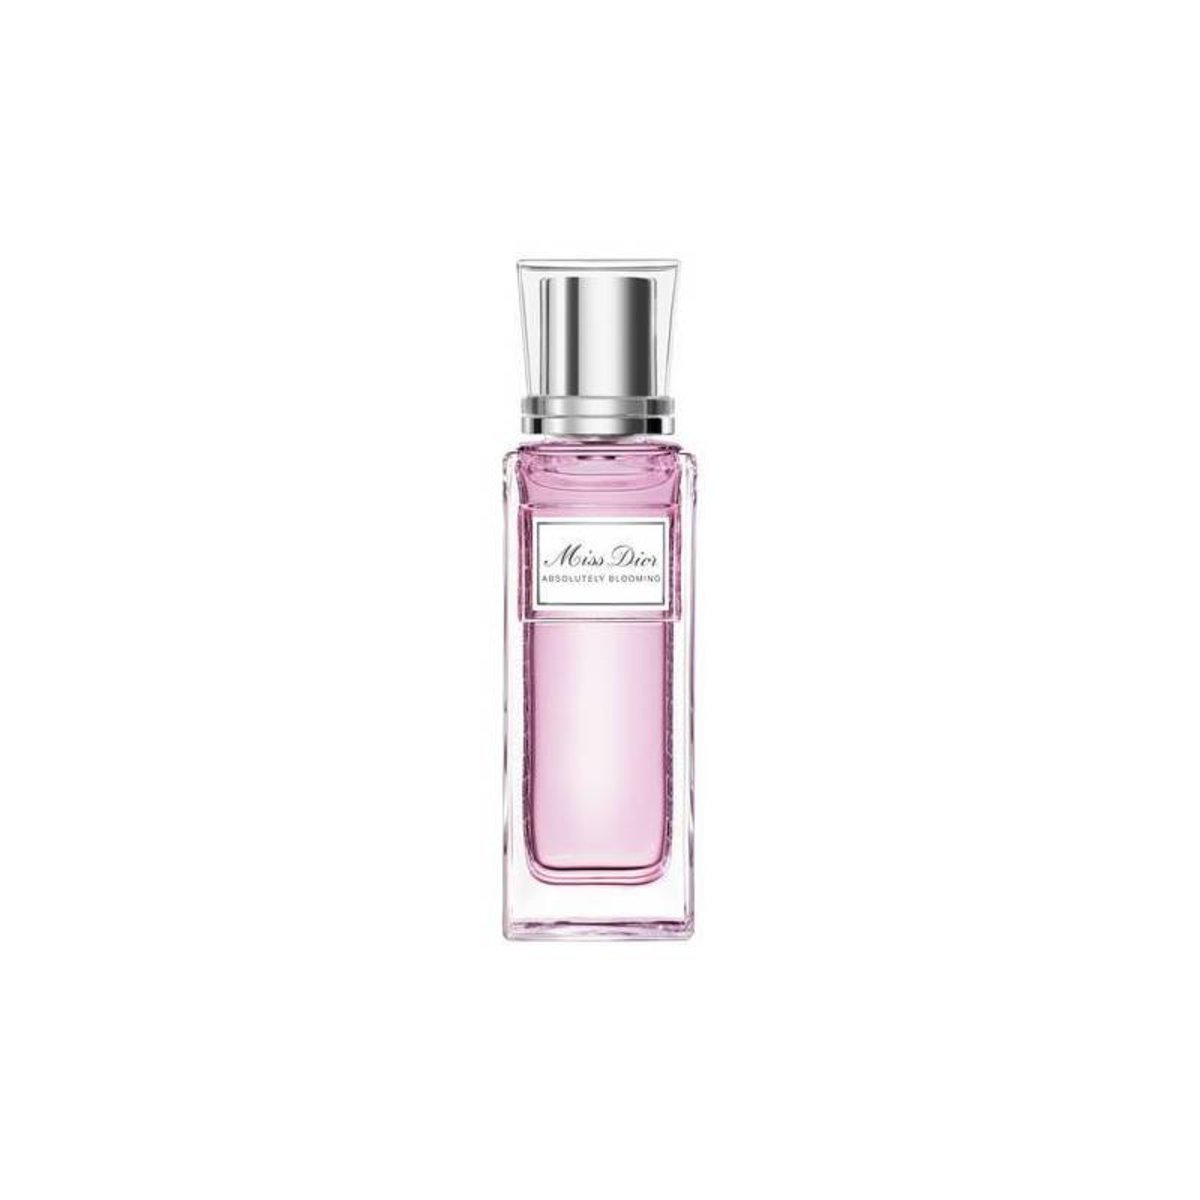 dior absolutely blooming 20ml